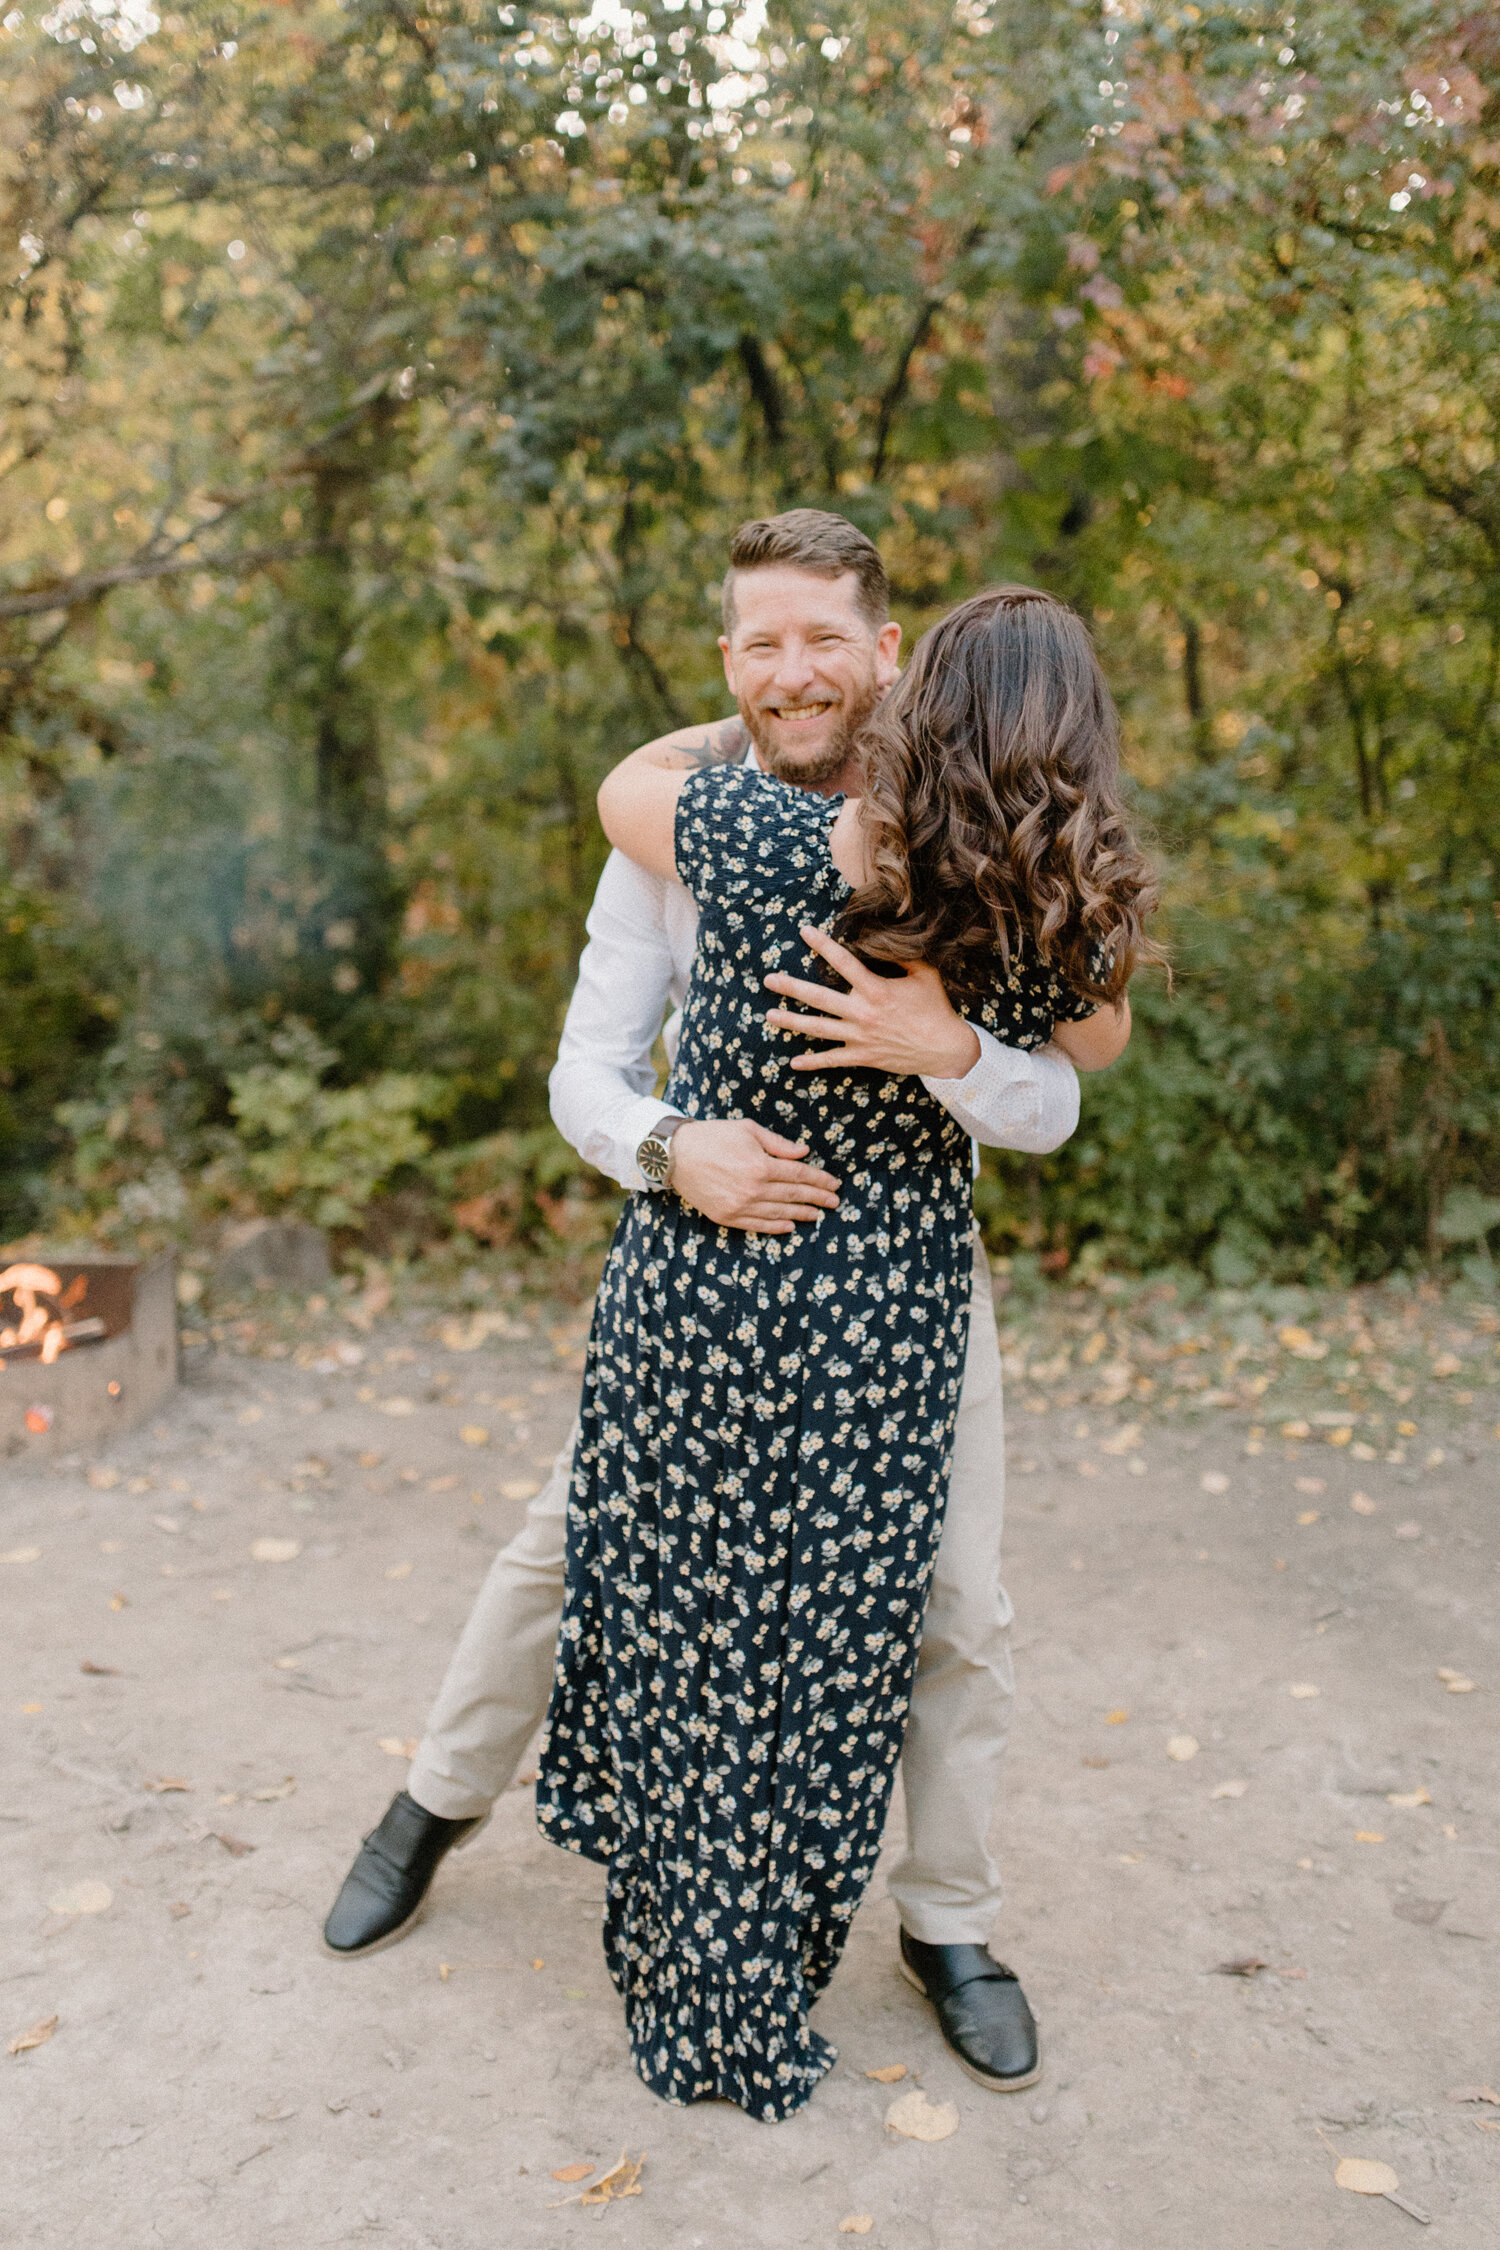  During this camping engagement session in the woods, Ontario, Canada’s Chelsea Mason Engagement this couple embrace and laugh. Hugging engaged couple, camping engagement session, wooded engagement session ontario canada, formal engagement outfit ins